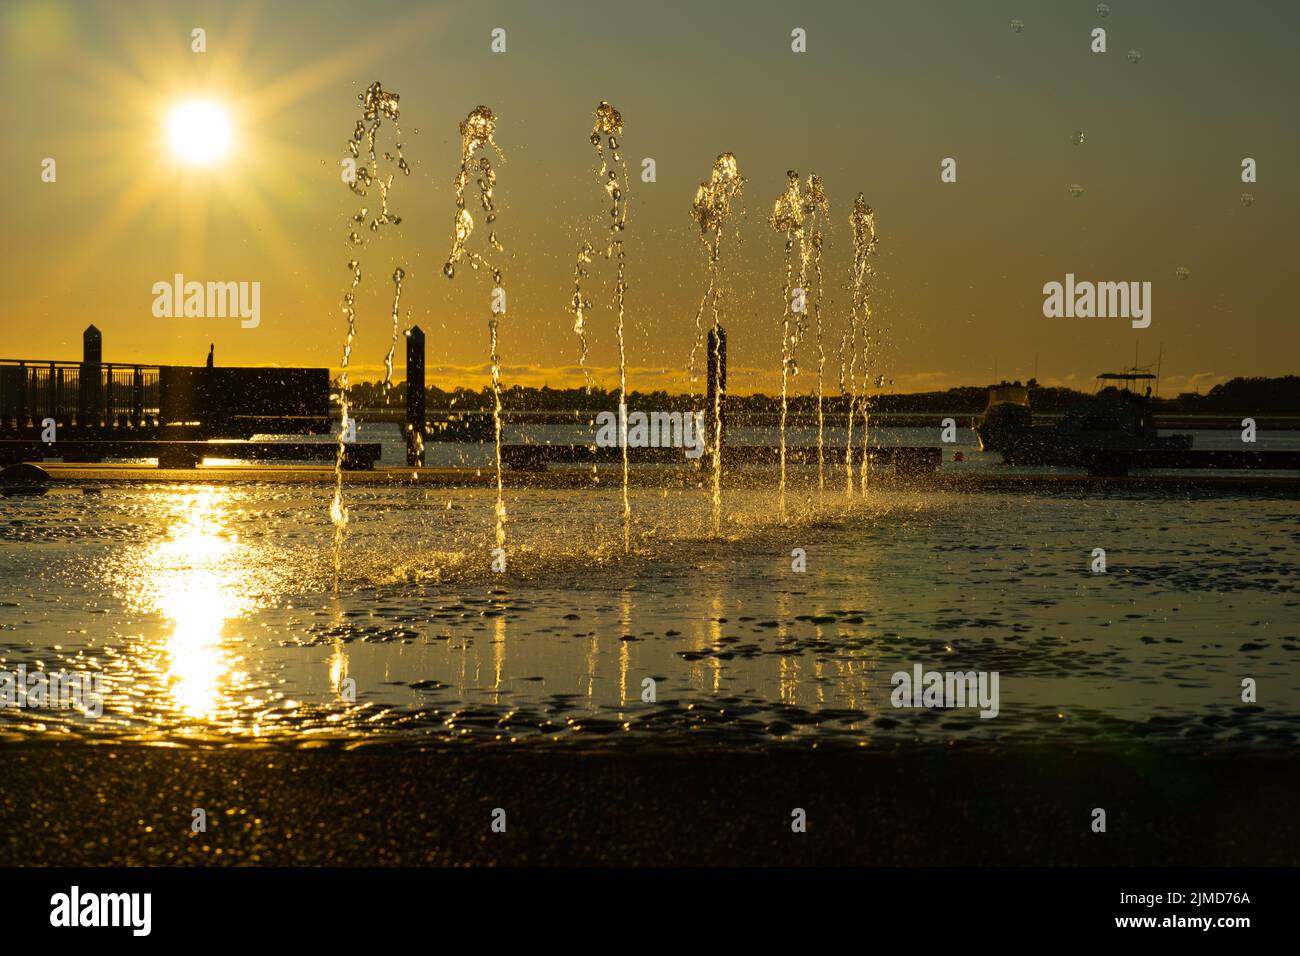 Water feature spraying waters in morning light on Tauranga Strand waterfront Stock Photo